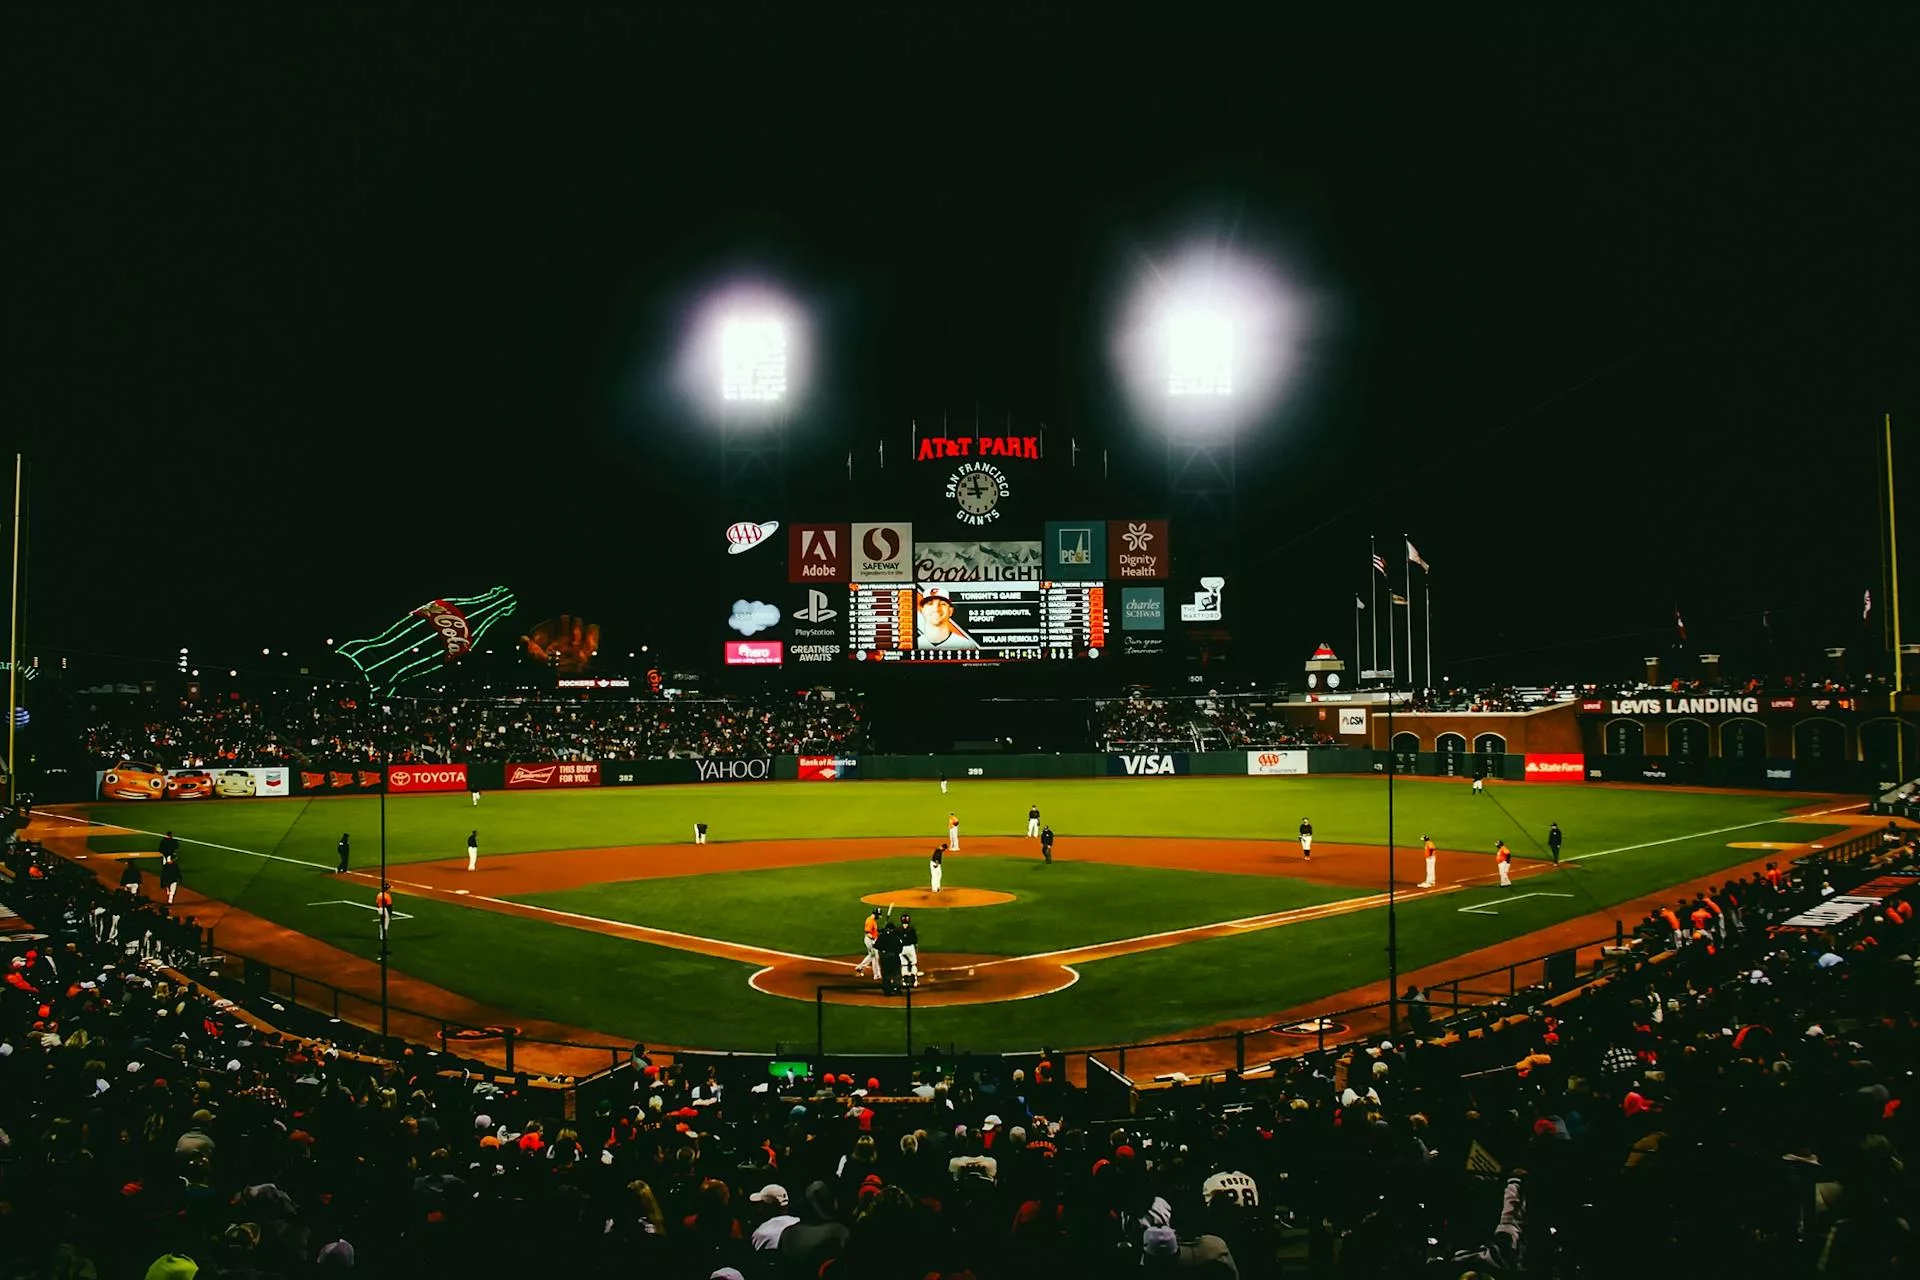 Action shot of an MLB game at night with players in motion and fans cheering in the stadium.